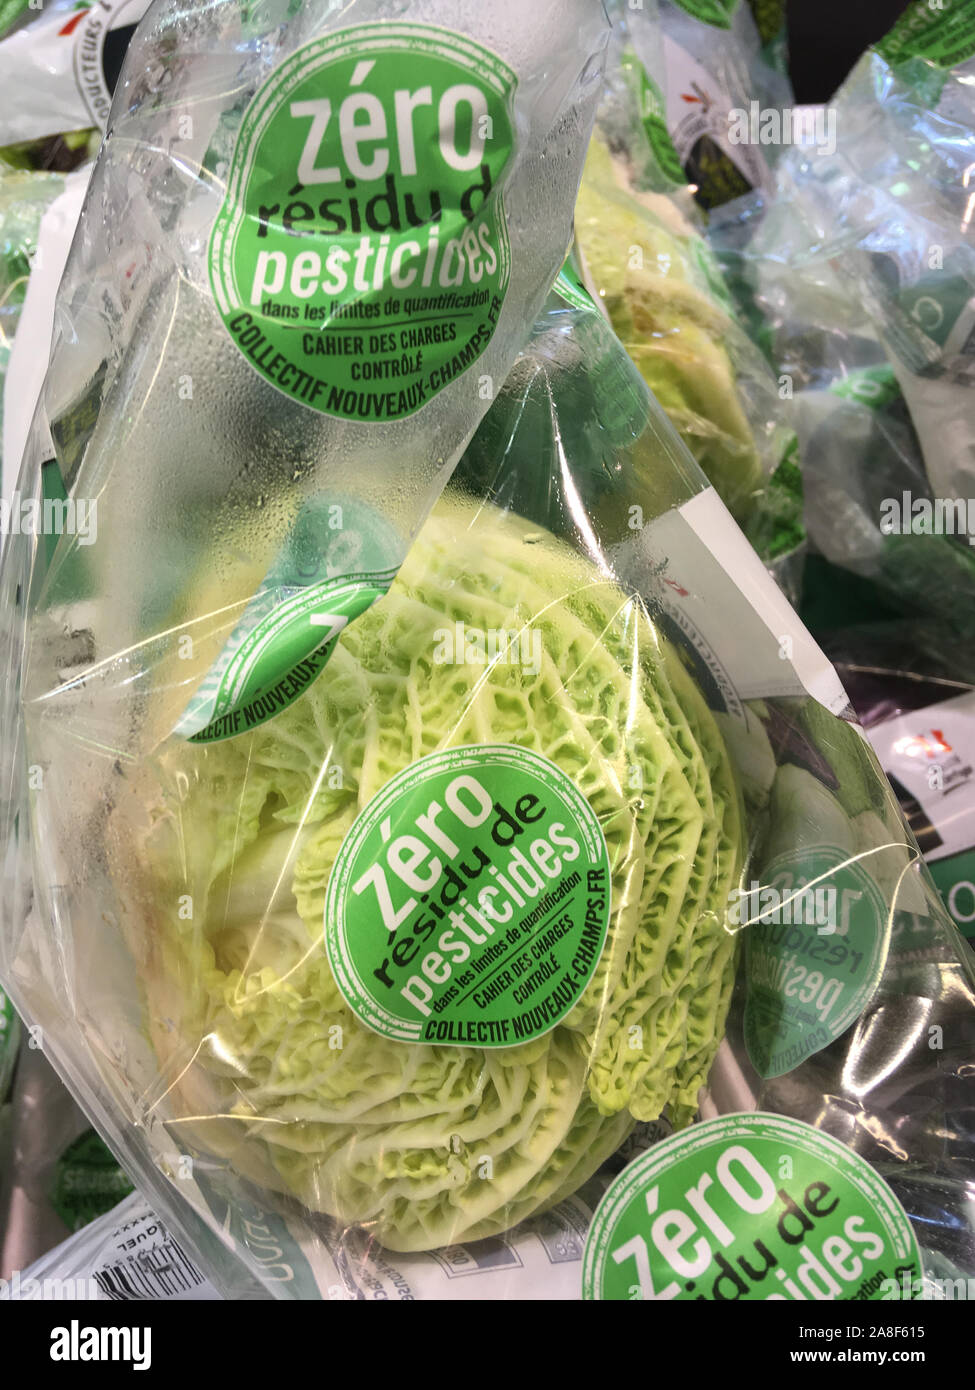 Organic cabbages under plastic package, Lyon, France Stock Photo